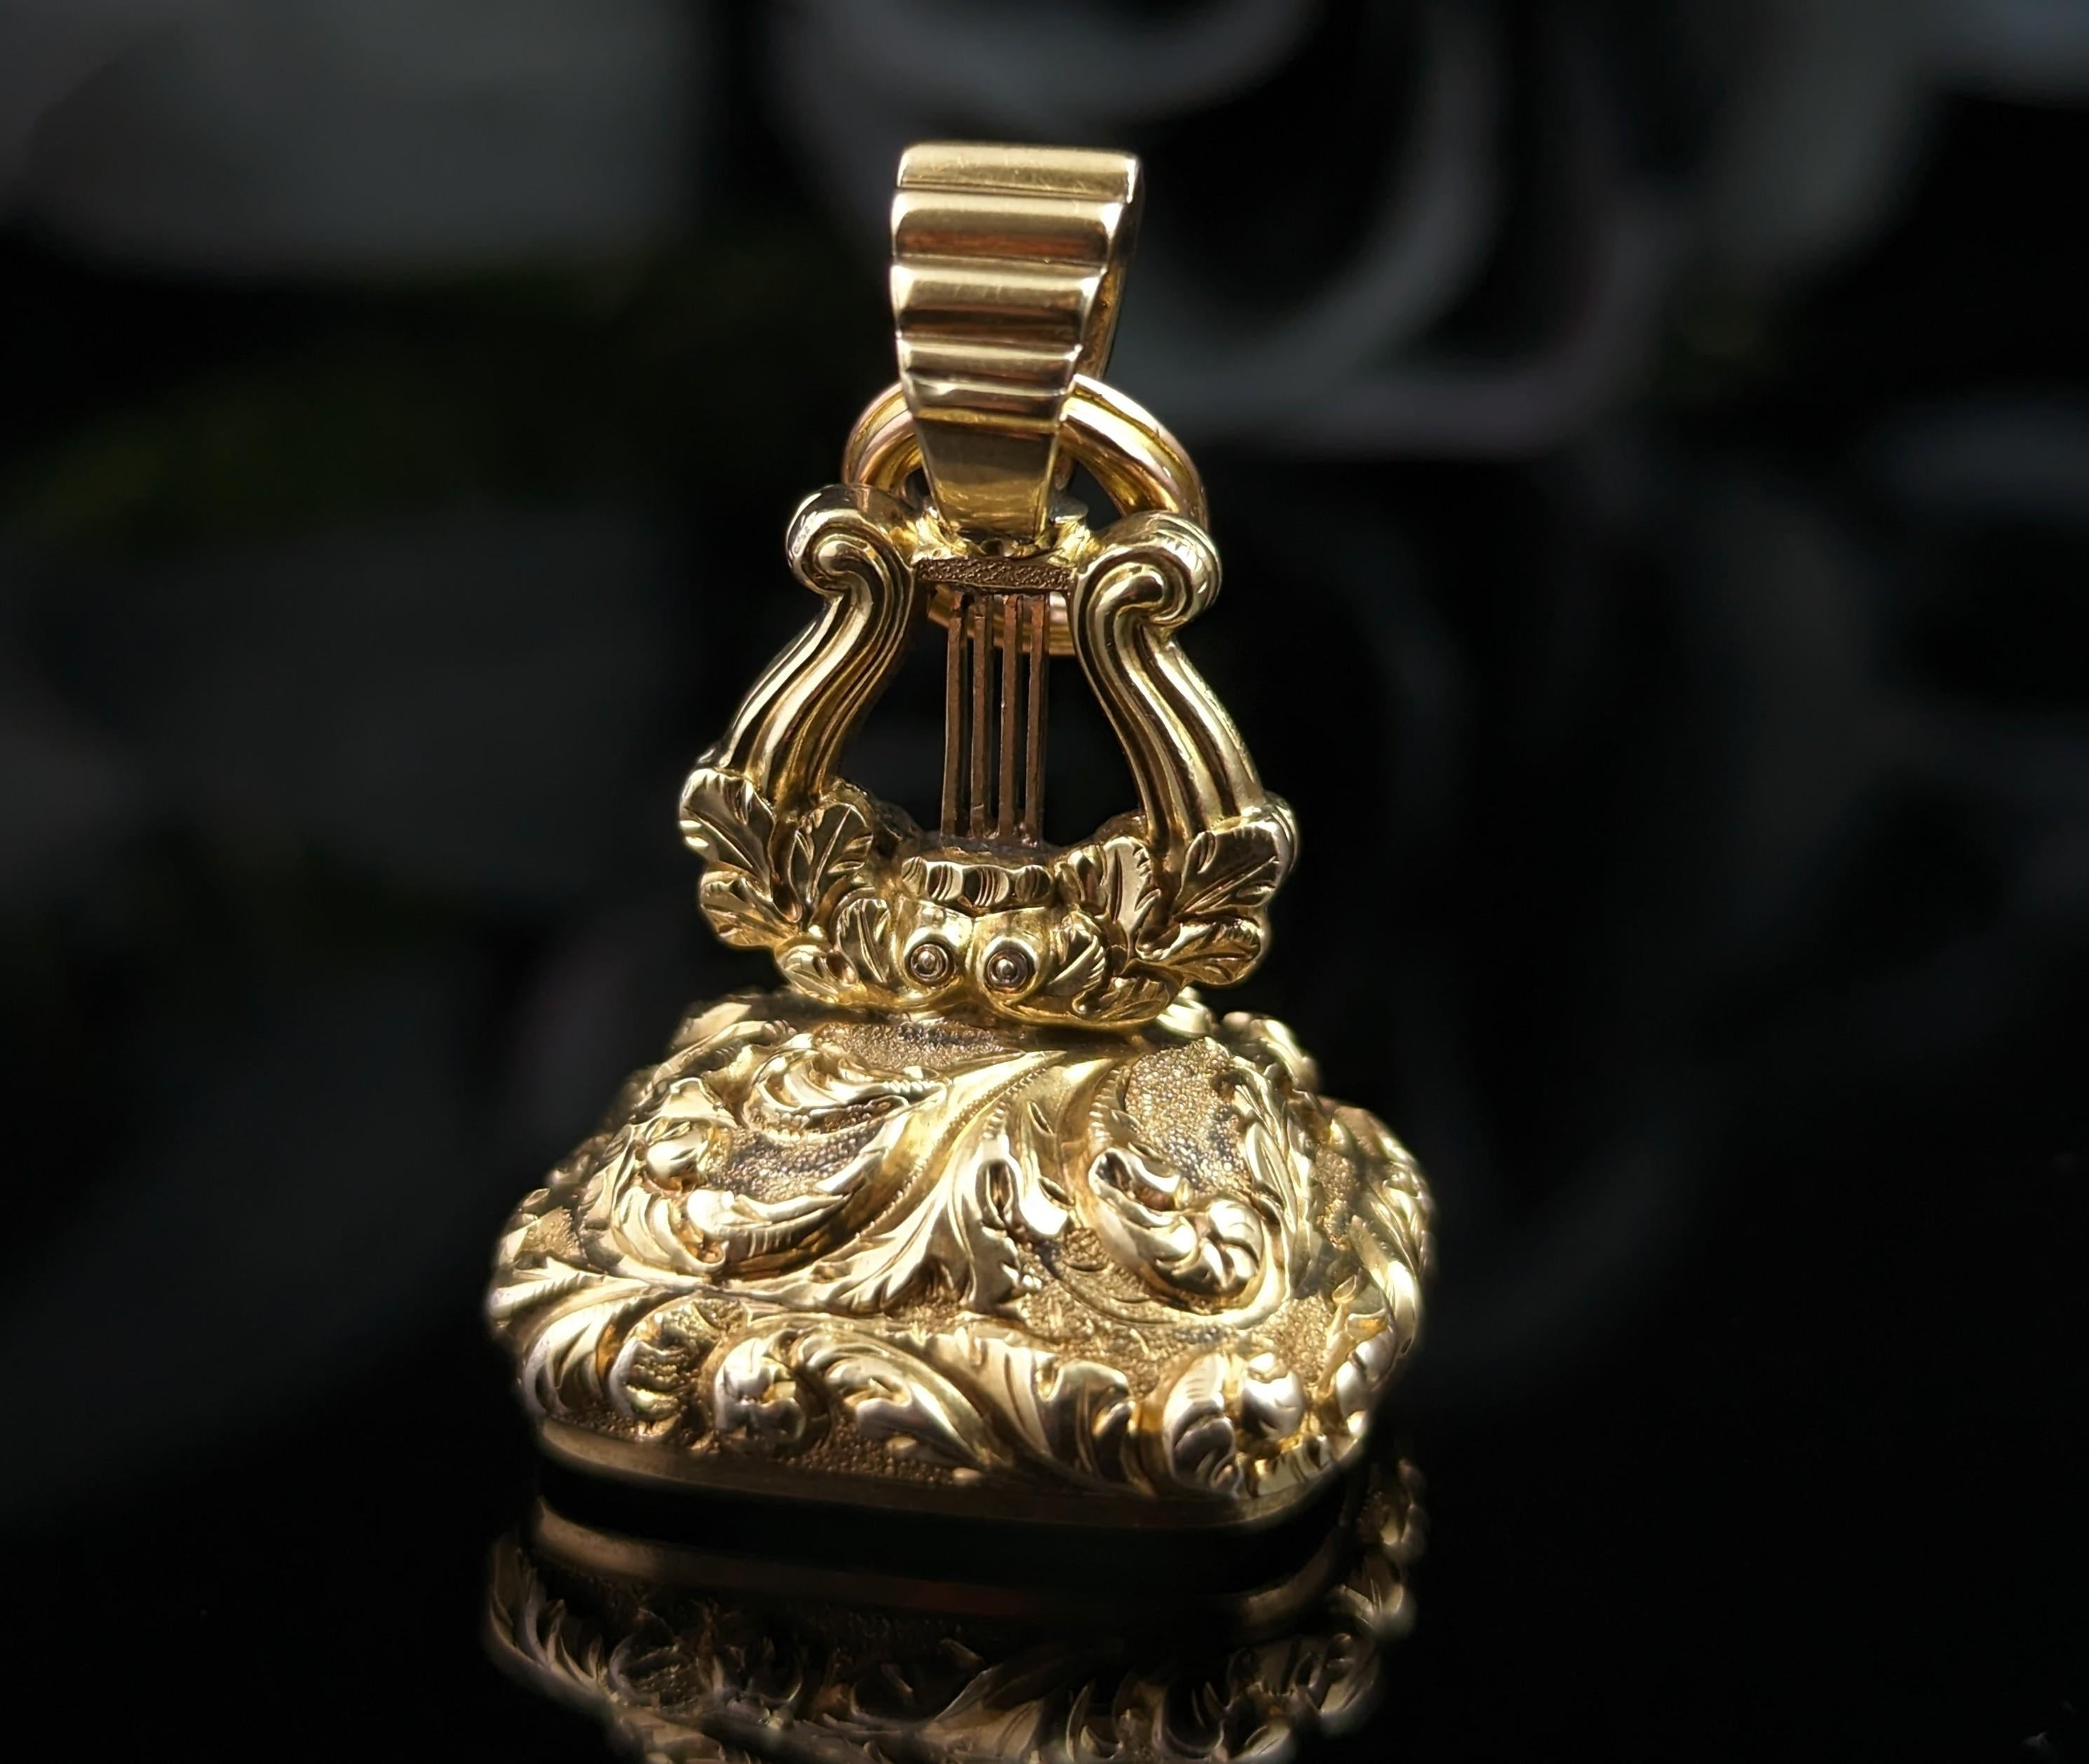 You can't go wrong with a beautiful antique seal fob, this heavy and substantial antique gold cased seal fob is a real versatile beauty.

Made from 9kt yellow gold cased metal, possibly low grade silver, early Victorian era, it has an elaborate